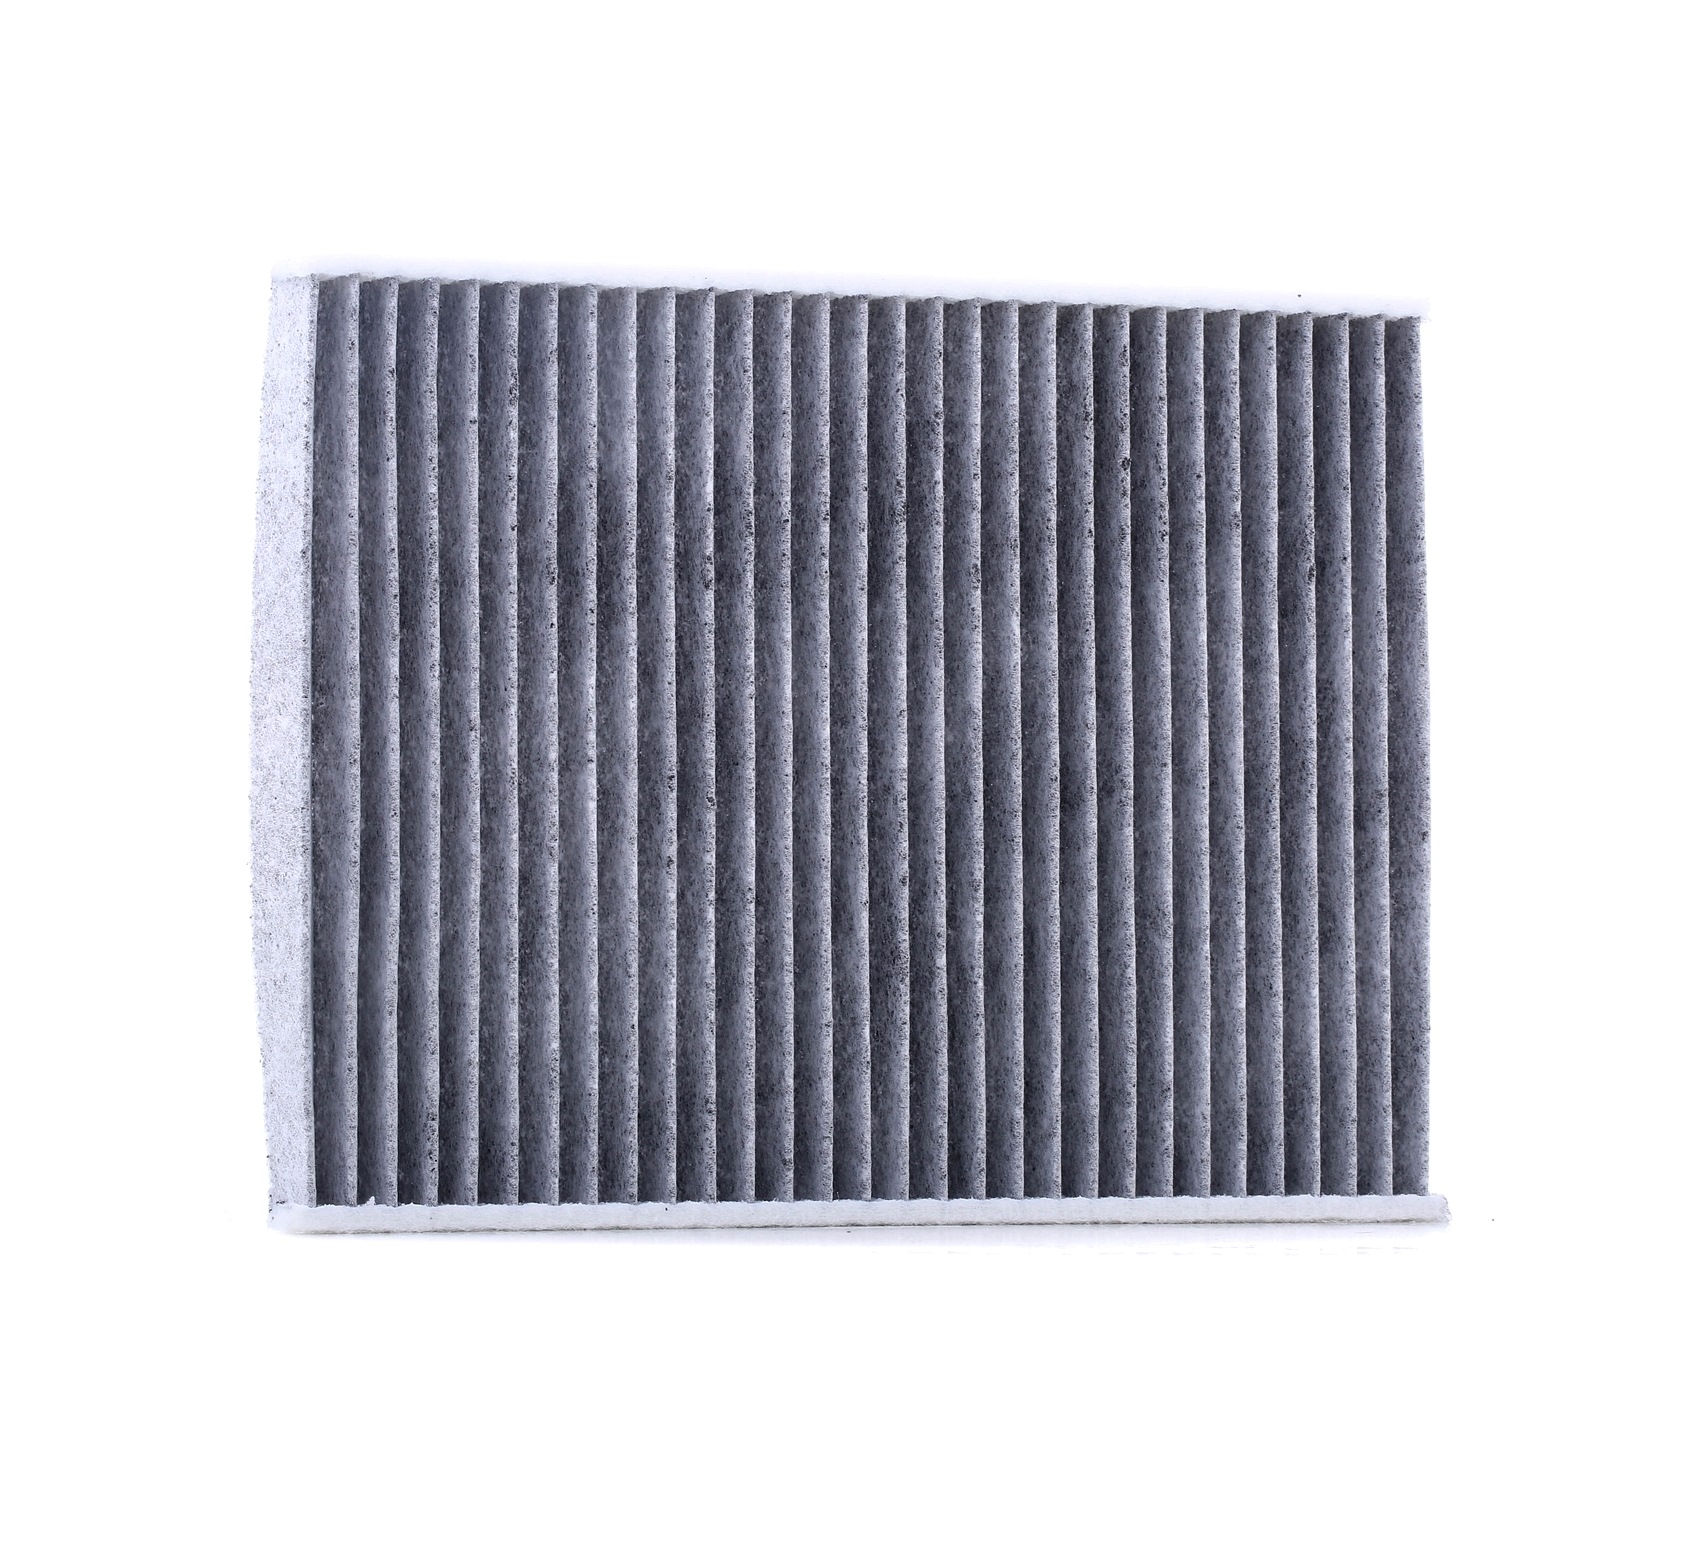 UFI Activated Carbon Filter, 240 mm x 189 mm x 22 mm Width: 189mm, Height: 22mm, Length: 240mm Cabin filter 54.170.00 buy